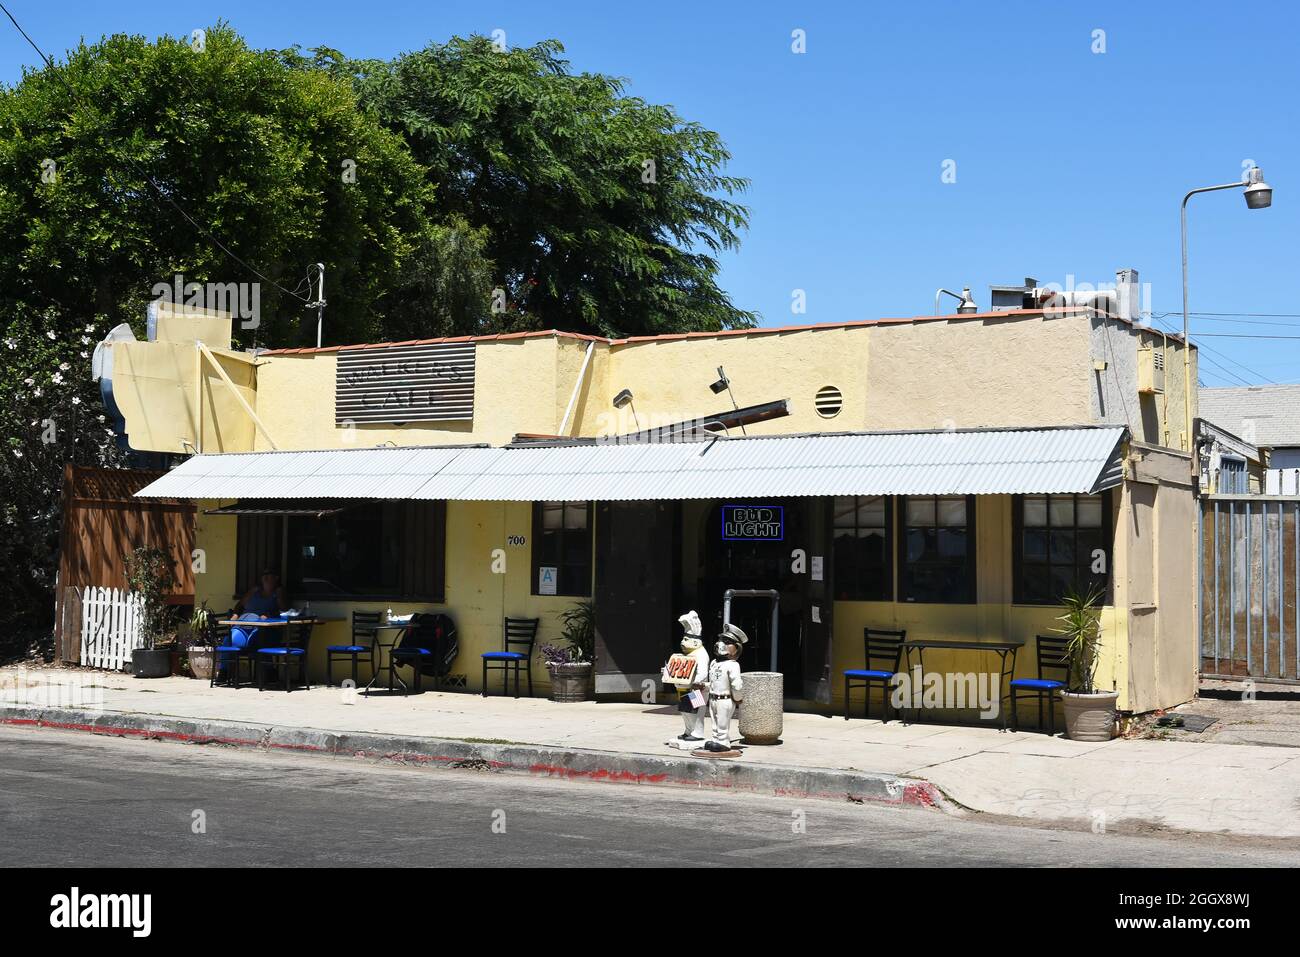 SAN PEDRO, CALIFORNIA - 27 AUG 2021: Walkers Cafe, a historic diner across from Point Fermin Park on Paseo del Mar. Stock Photo